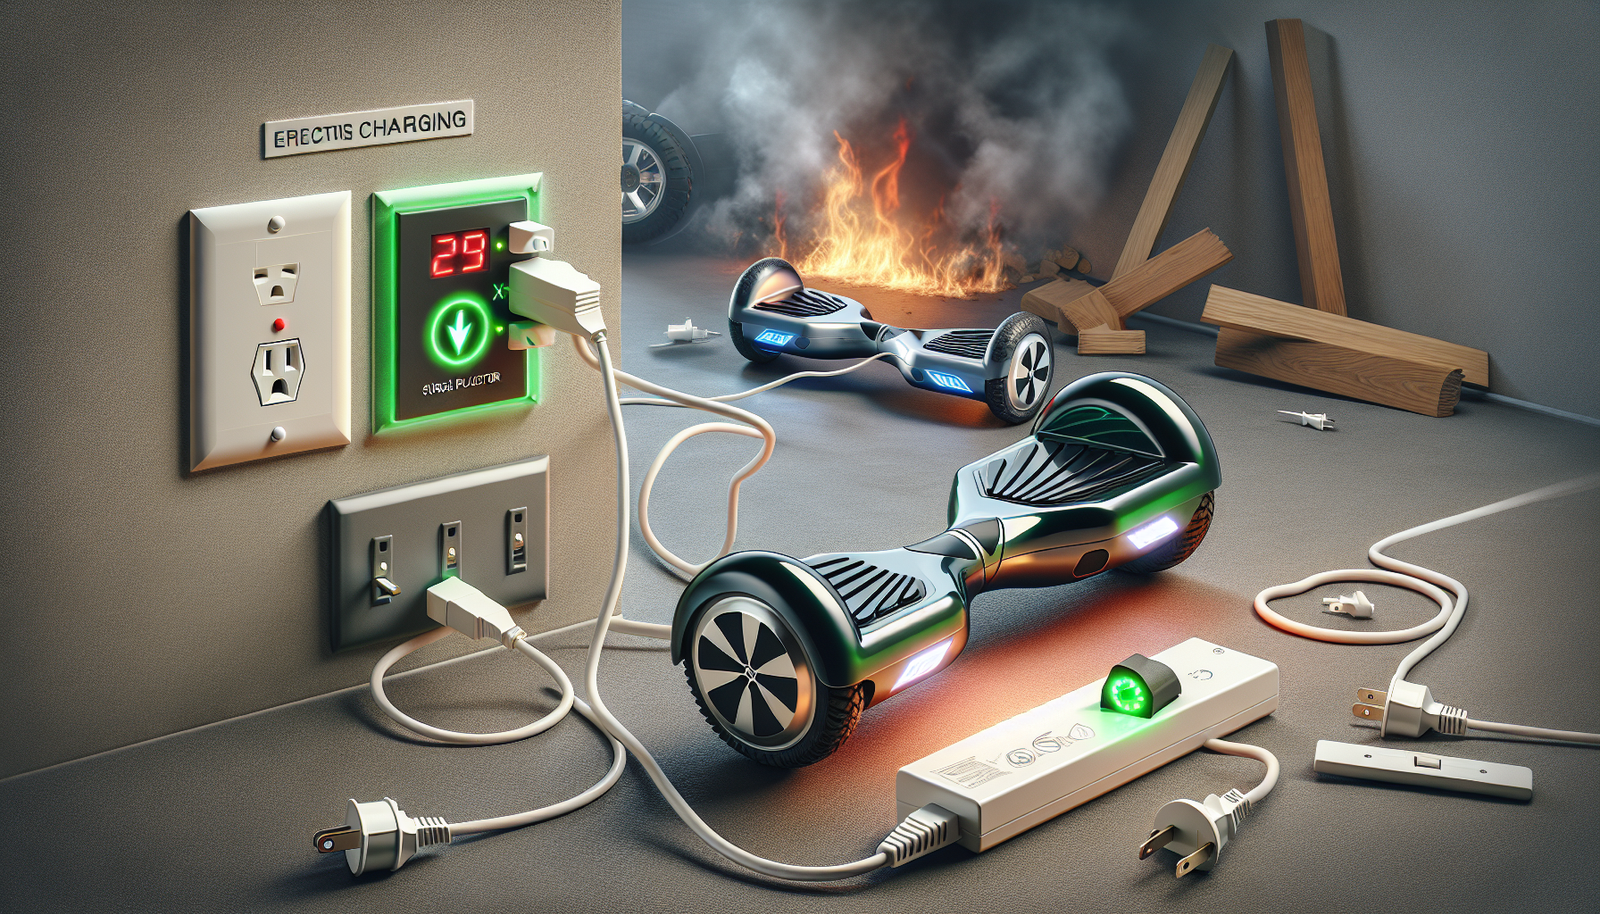 How Do I Charge My Hoverboard Safely, And Are There Any Fire Hazards?